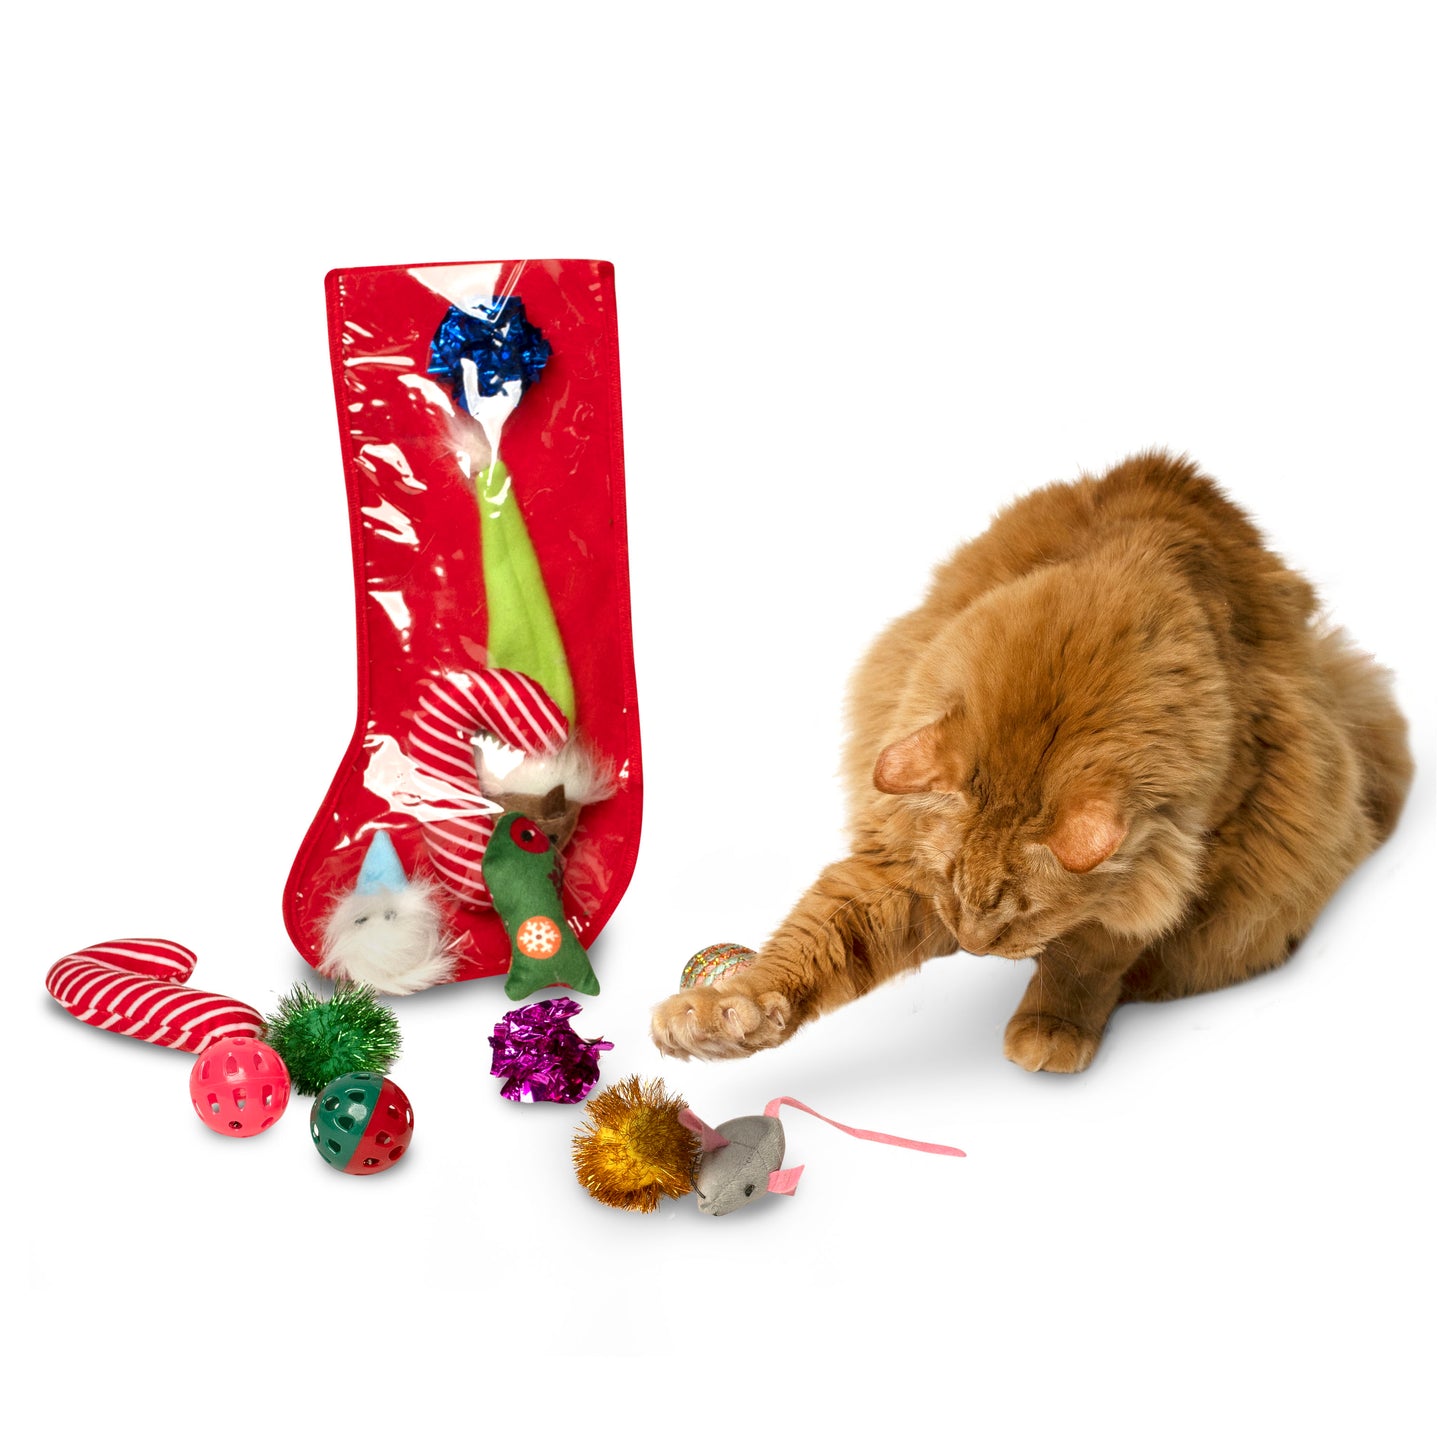 Midlee Christmas Stocking Cat Toy Gift Set (14 Toys)- Candy Canes, Bells, Mice Kitten Holiday Toys